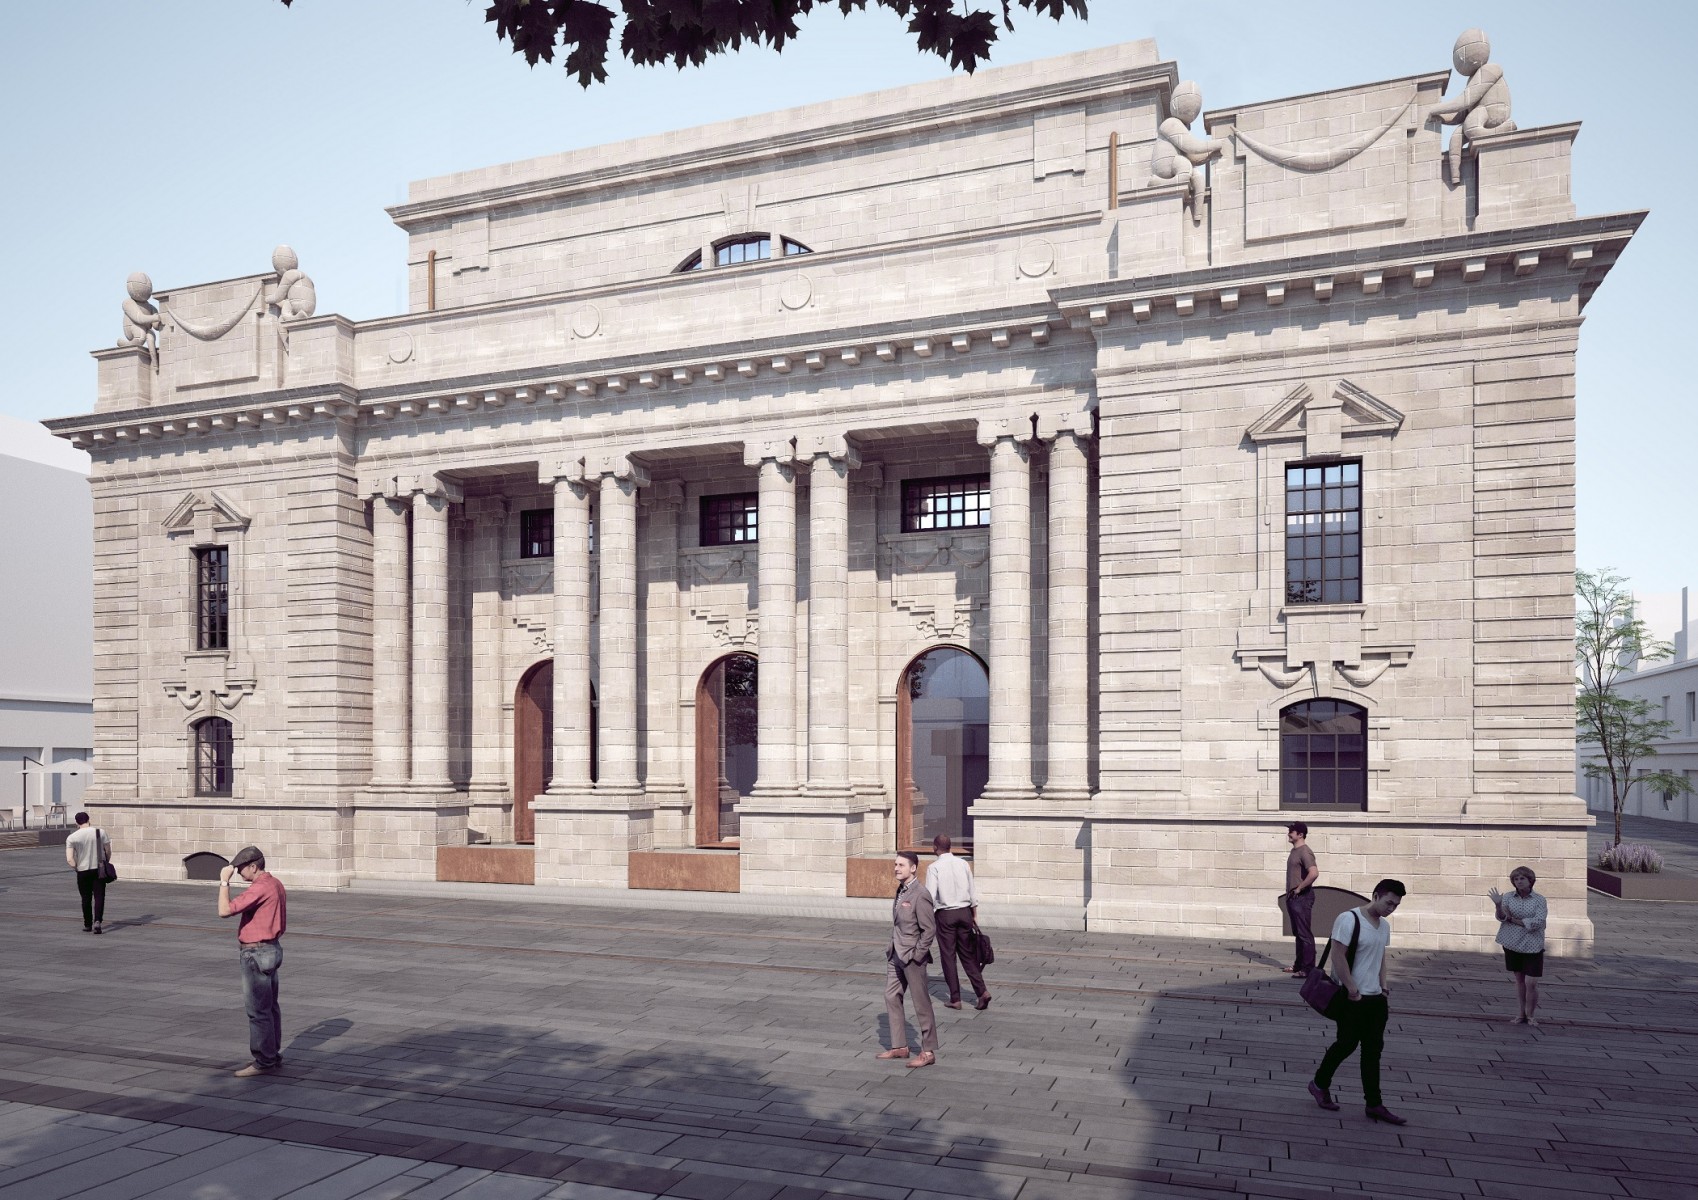 Perth City Hall transformation plan gets final approval